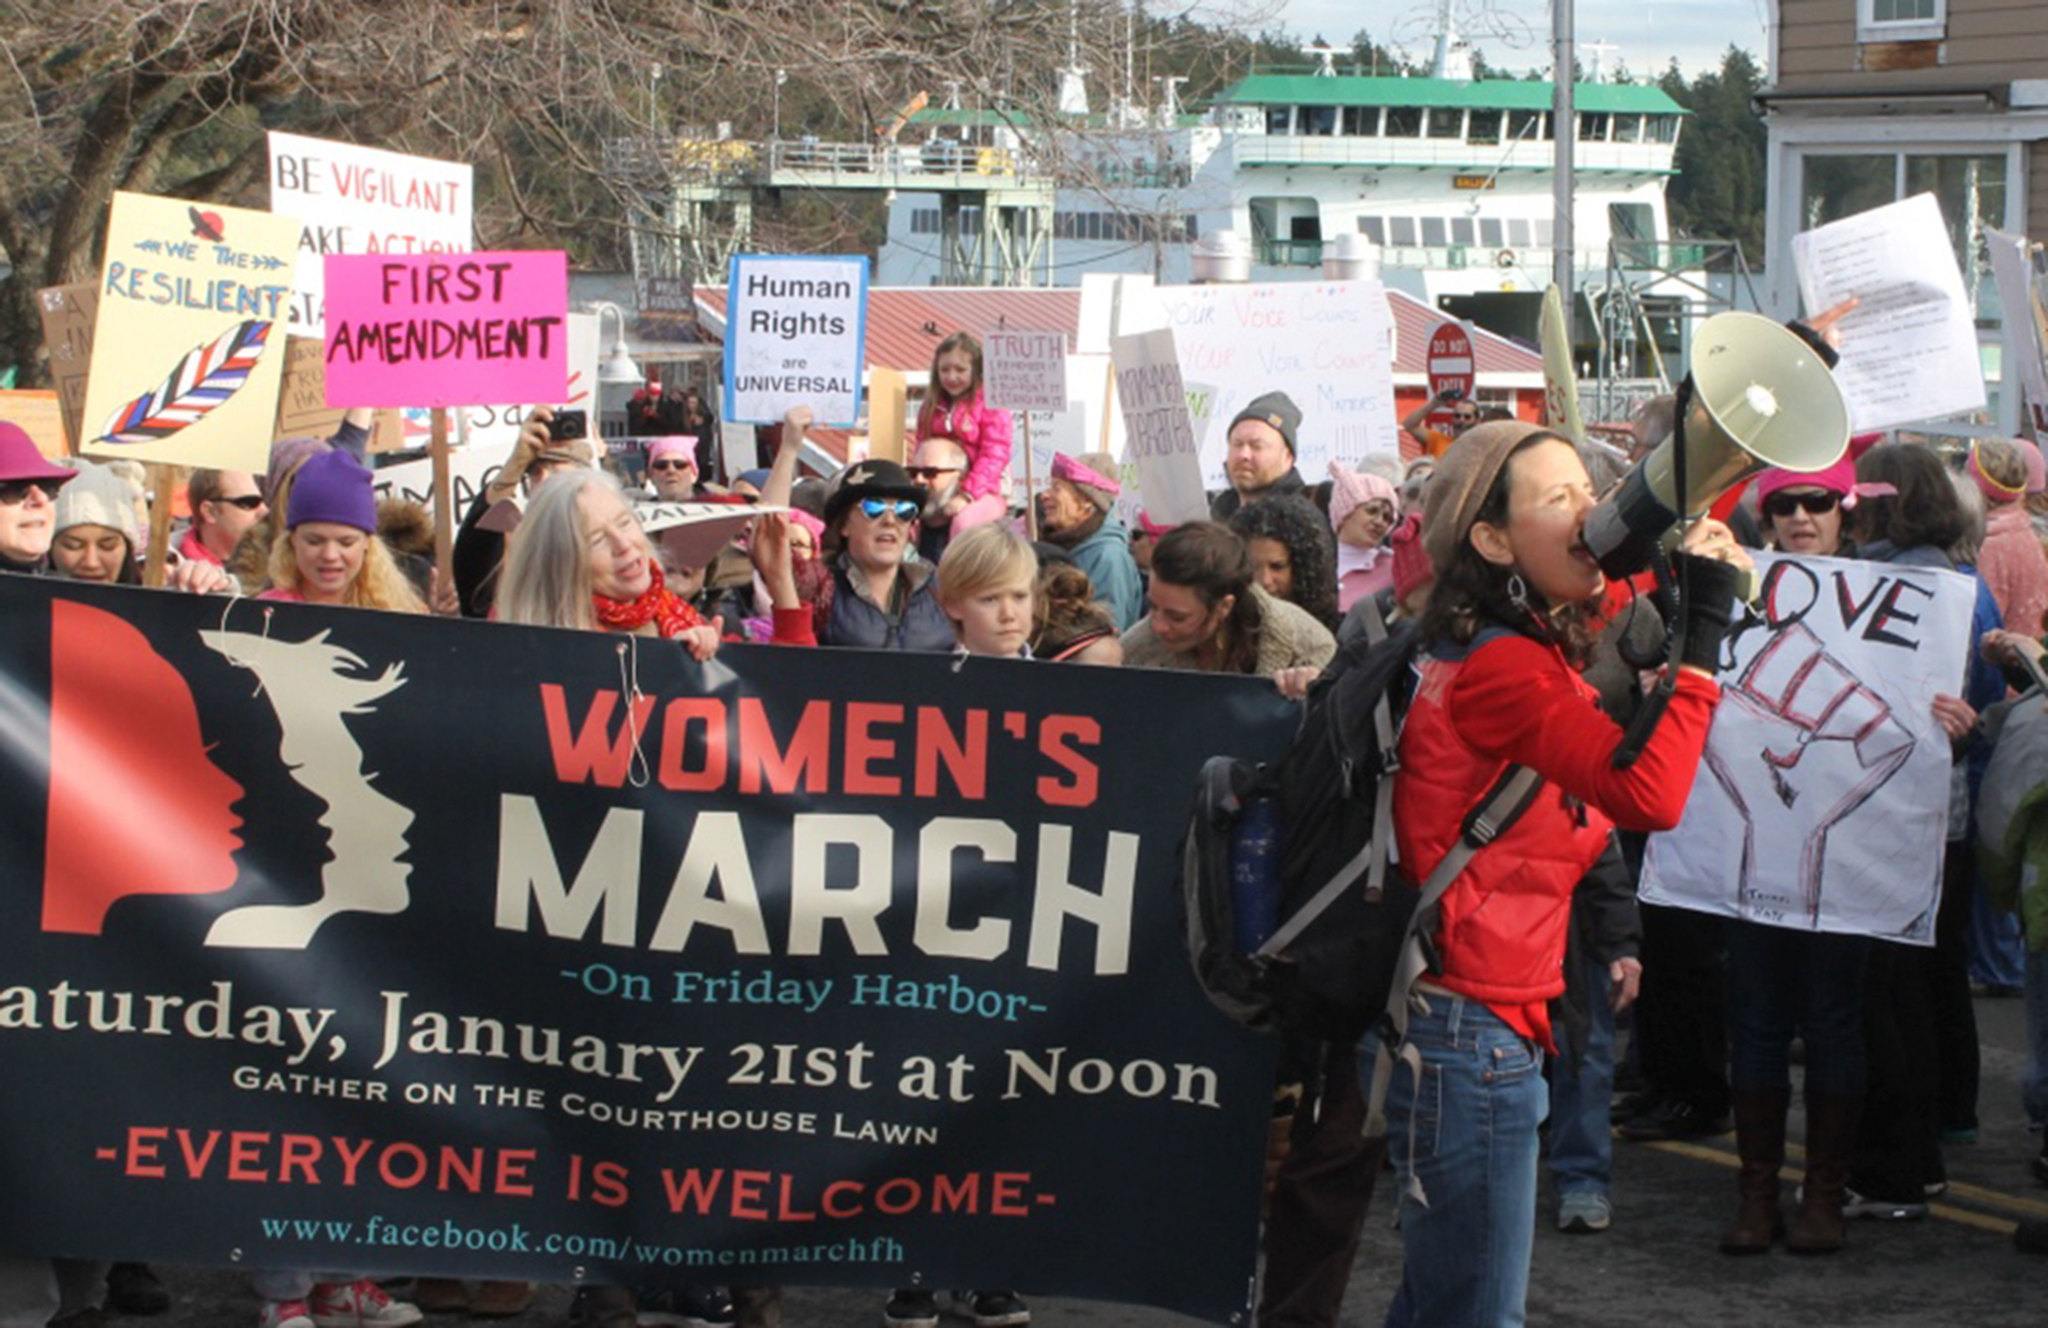 Women’s March on Friday Harbor mirrors national rallies